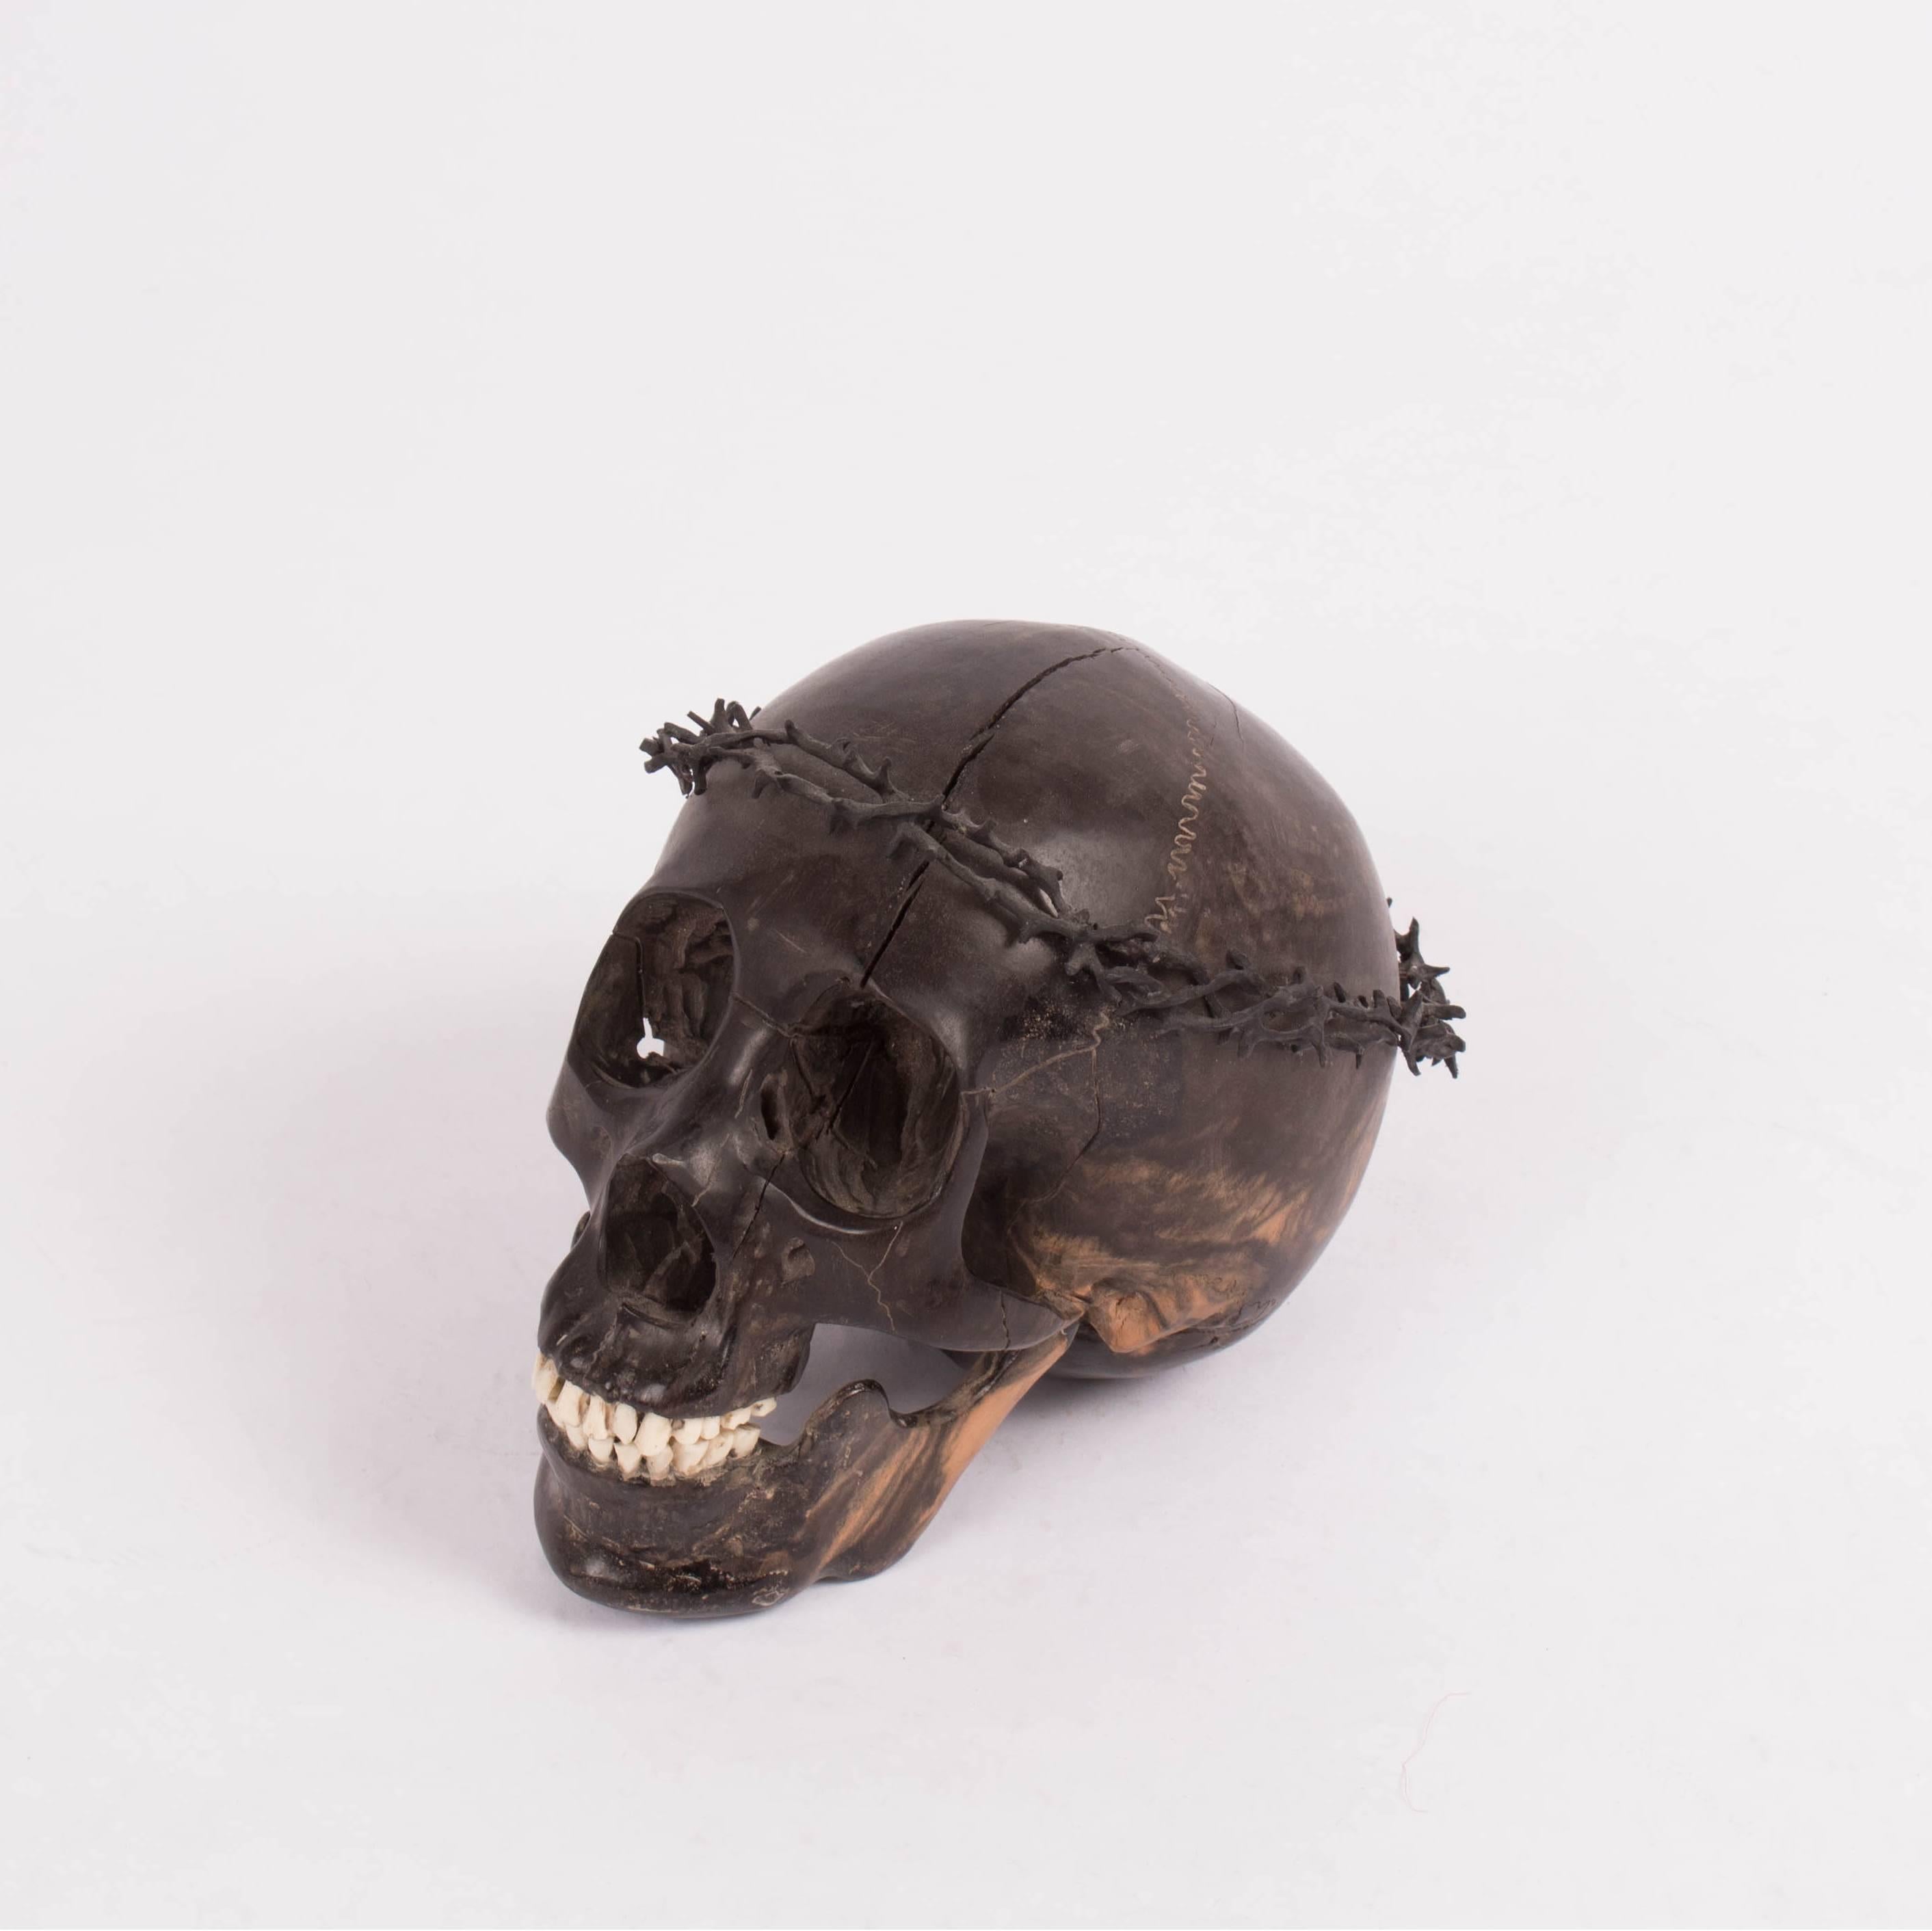 Carved iron wooden skull with deer Horn teeth and buffalo horn crown of thorns.